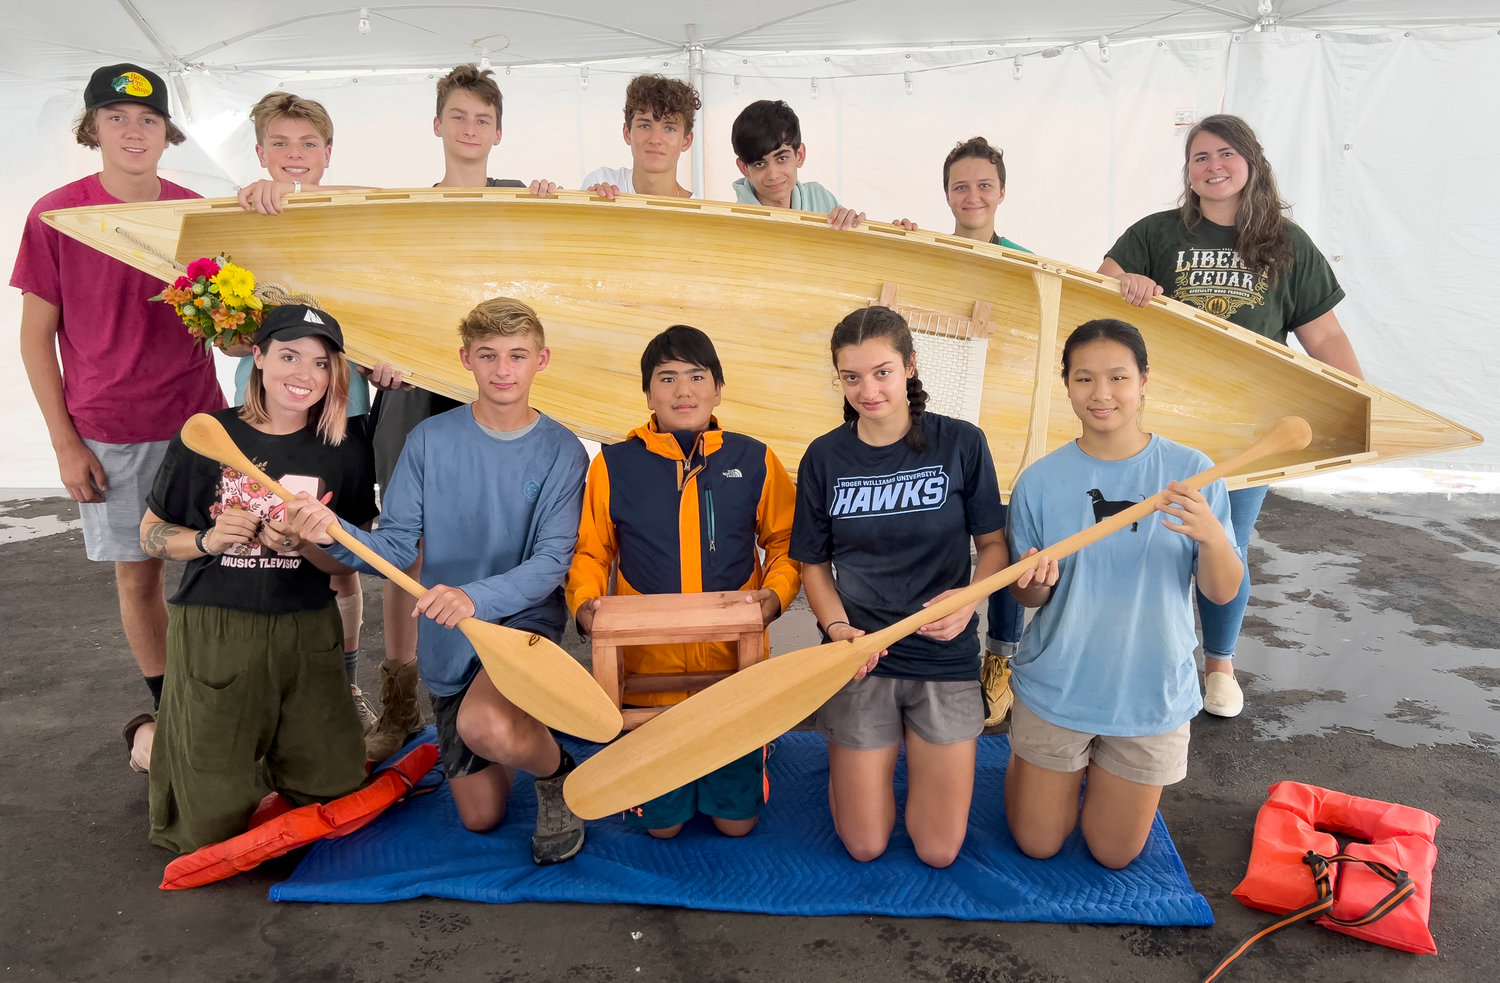 The boat building class poses with the one man wooden canoe that they built with paddles. Row one from left, assistant instructor Melissa Conlon,  Jarrett Rodrigues, Matthew Kibarian, Sonia Staroscik, Elena Sun, row two (top), Michael Kiselka, Colby Konz, Nickolas Markham, Erich Veegh, Aidan Enjeti, Thea Willner, instructor Ariana Murphy.